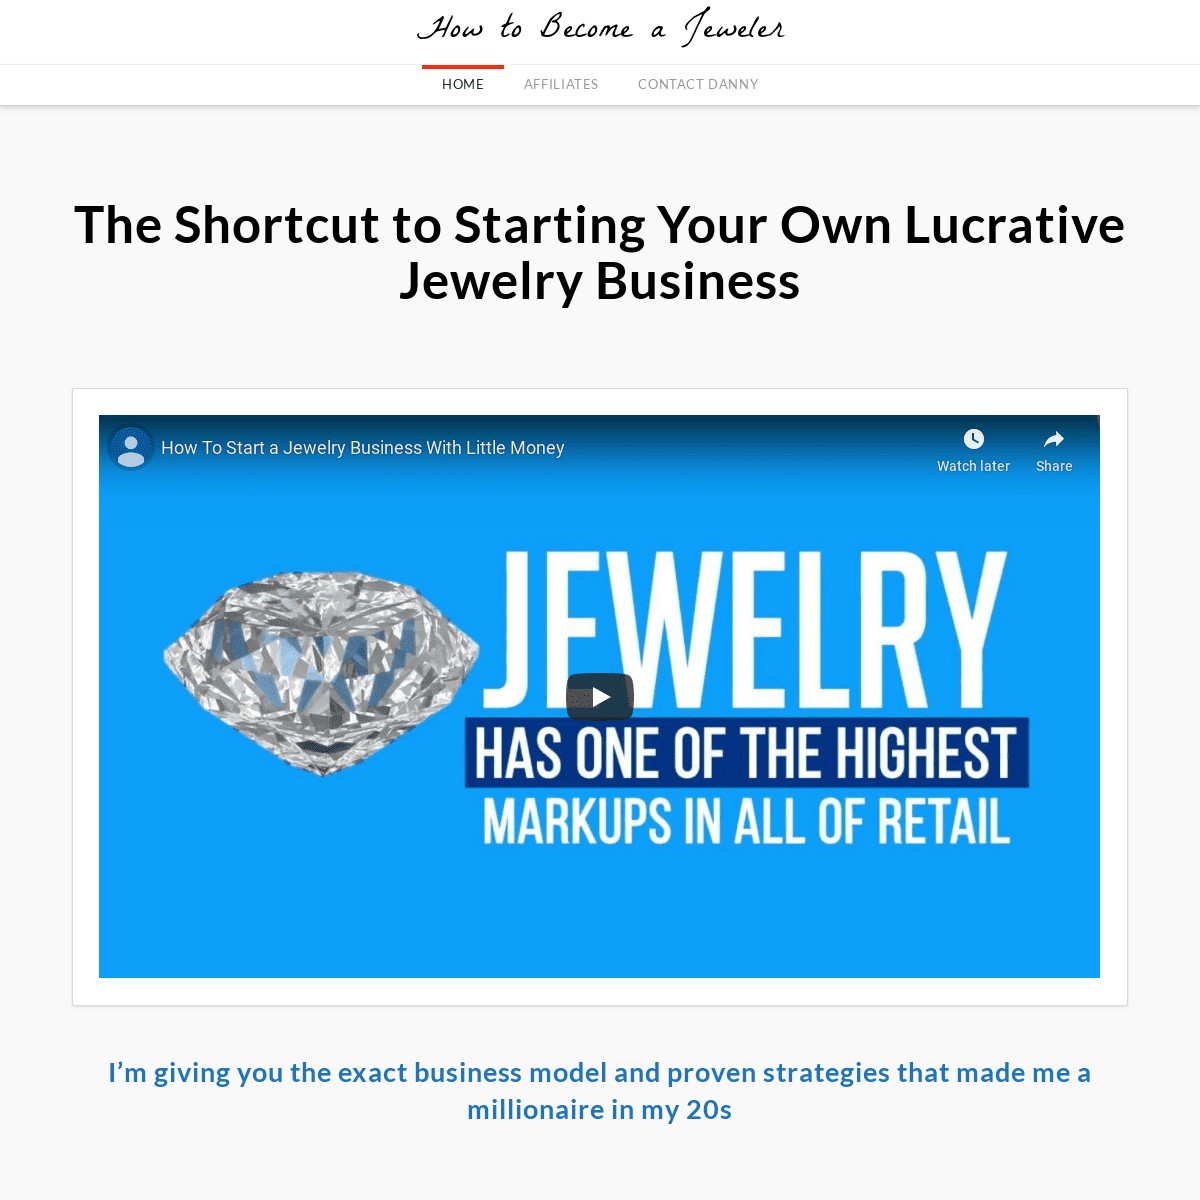 A complete backup of howtobecomeajeweler.com